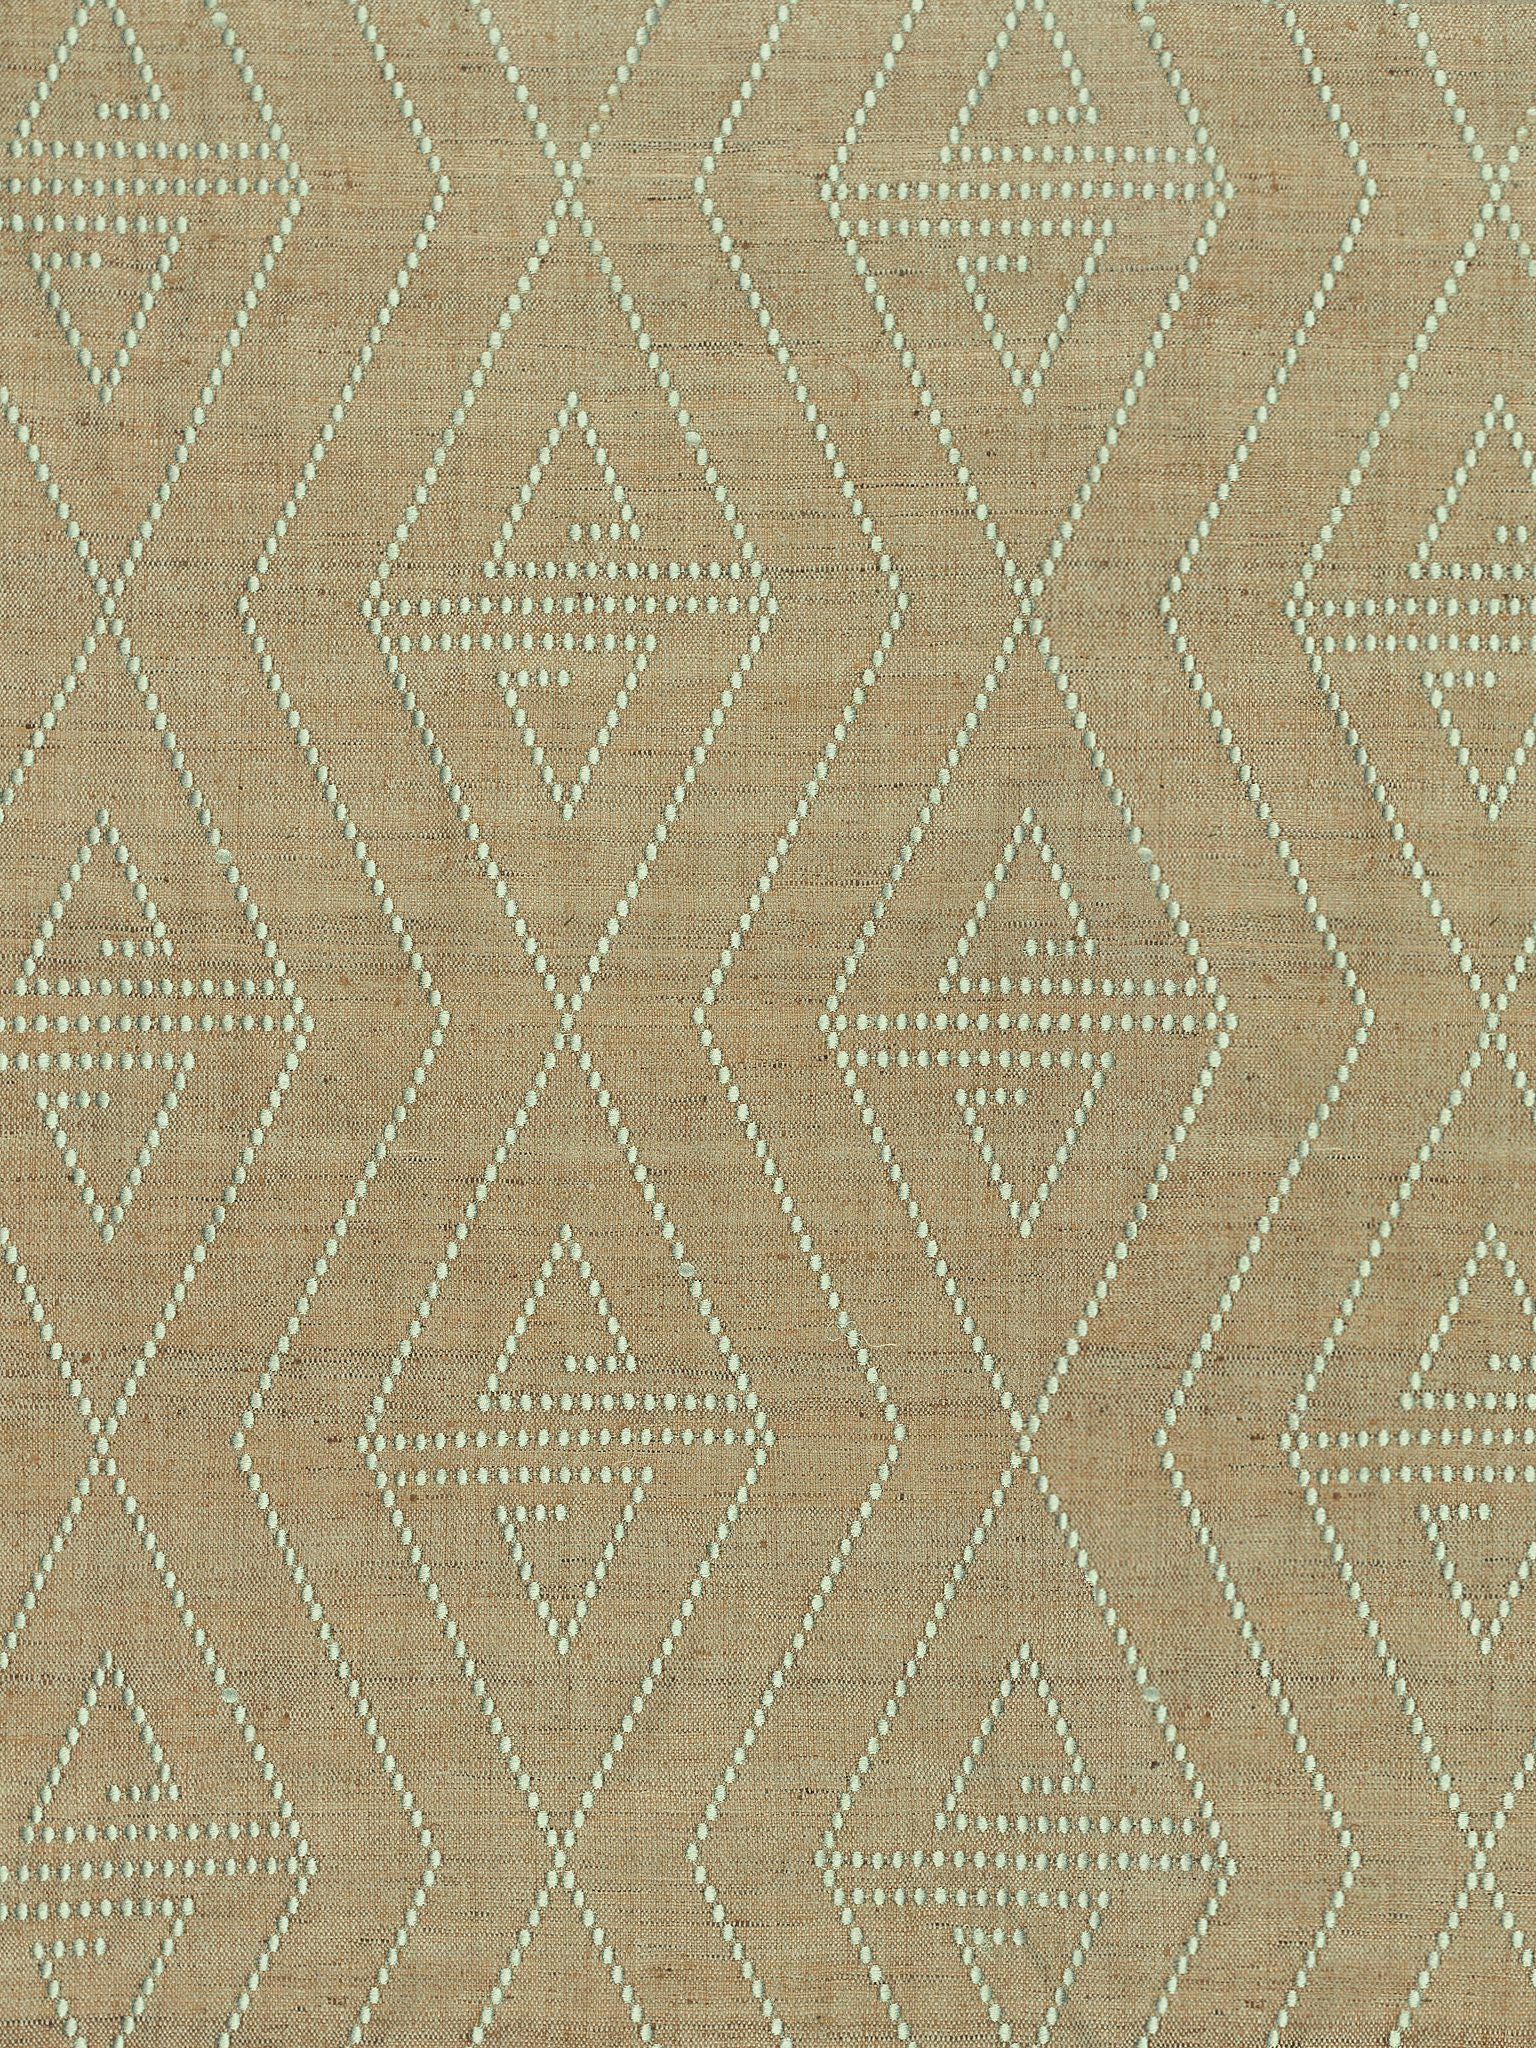 Torquay fabric in celadon color - pattern number ZS 00138068 - by Scalamandre in the Old World Weavers collection